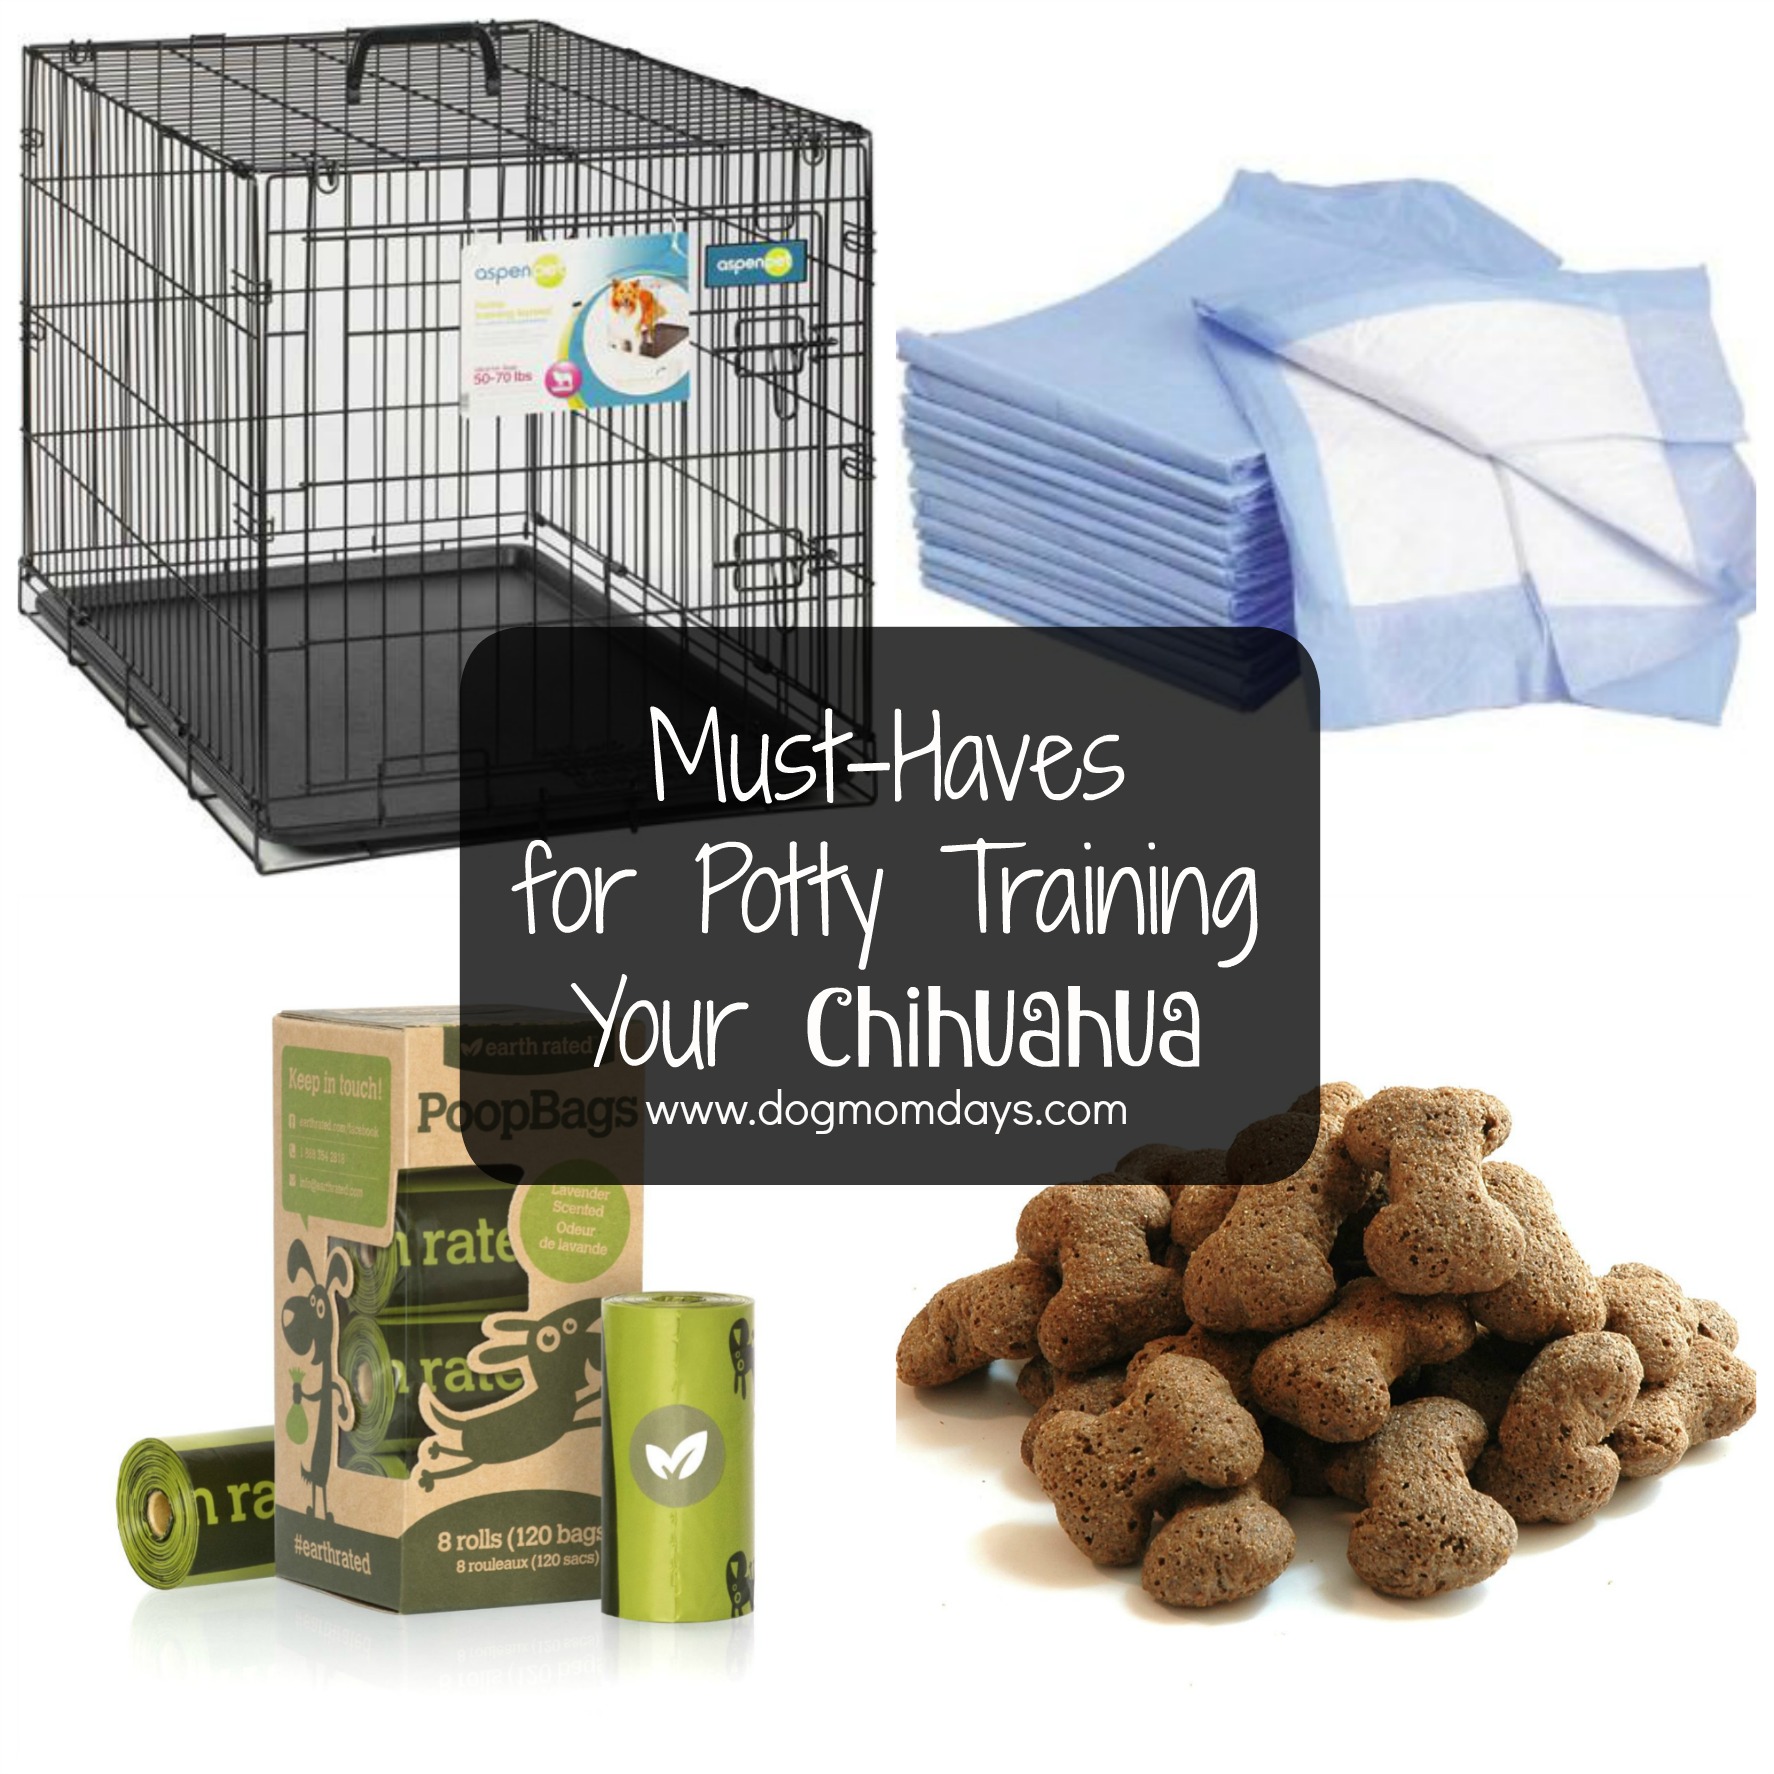 10 Tips for Effectively Potty Training Your Chihuahua